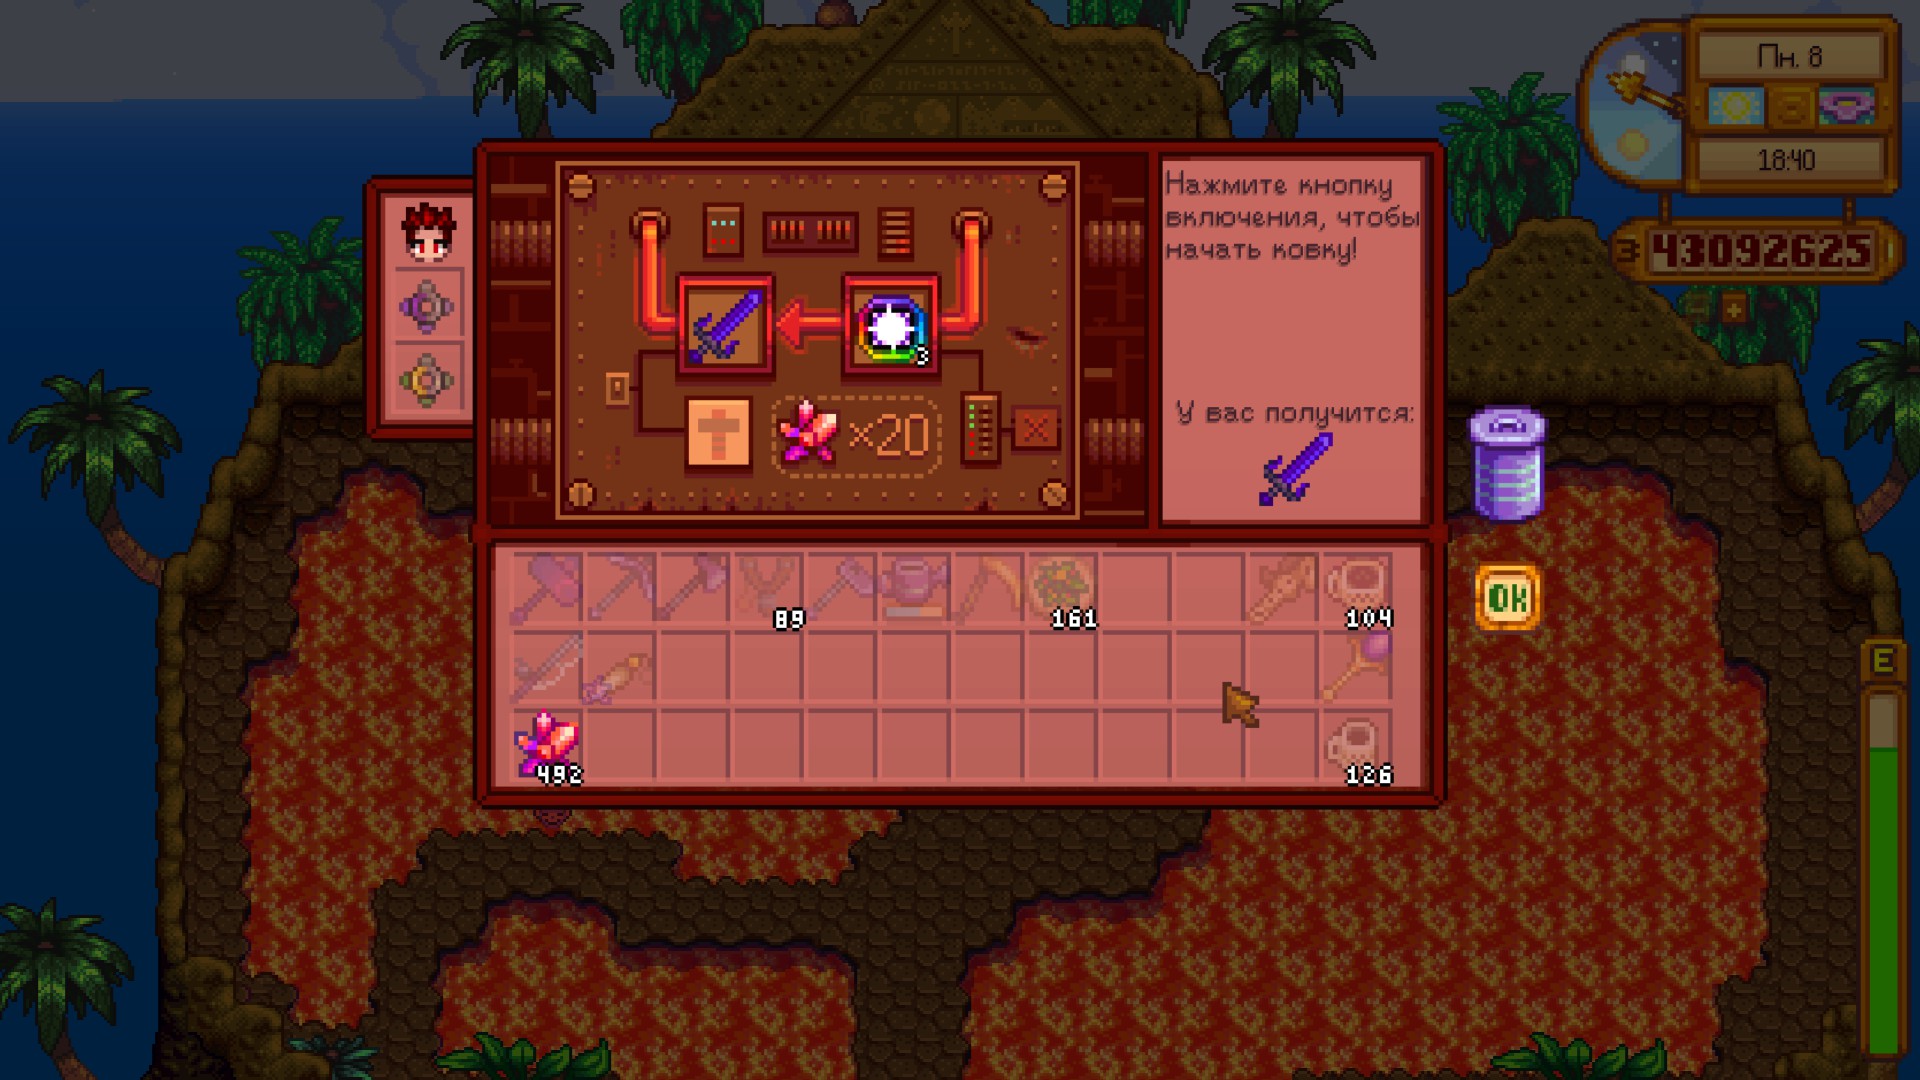 How To Get Infinite Power Achievement Using An Old Save in Stardew Valley